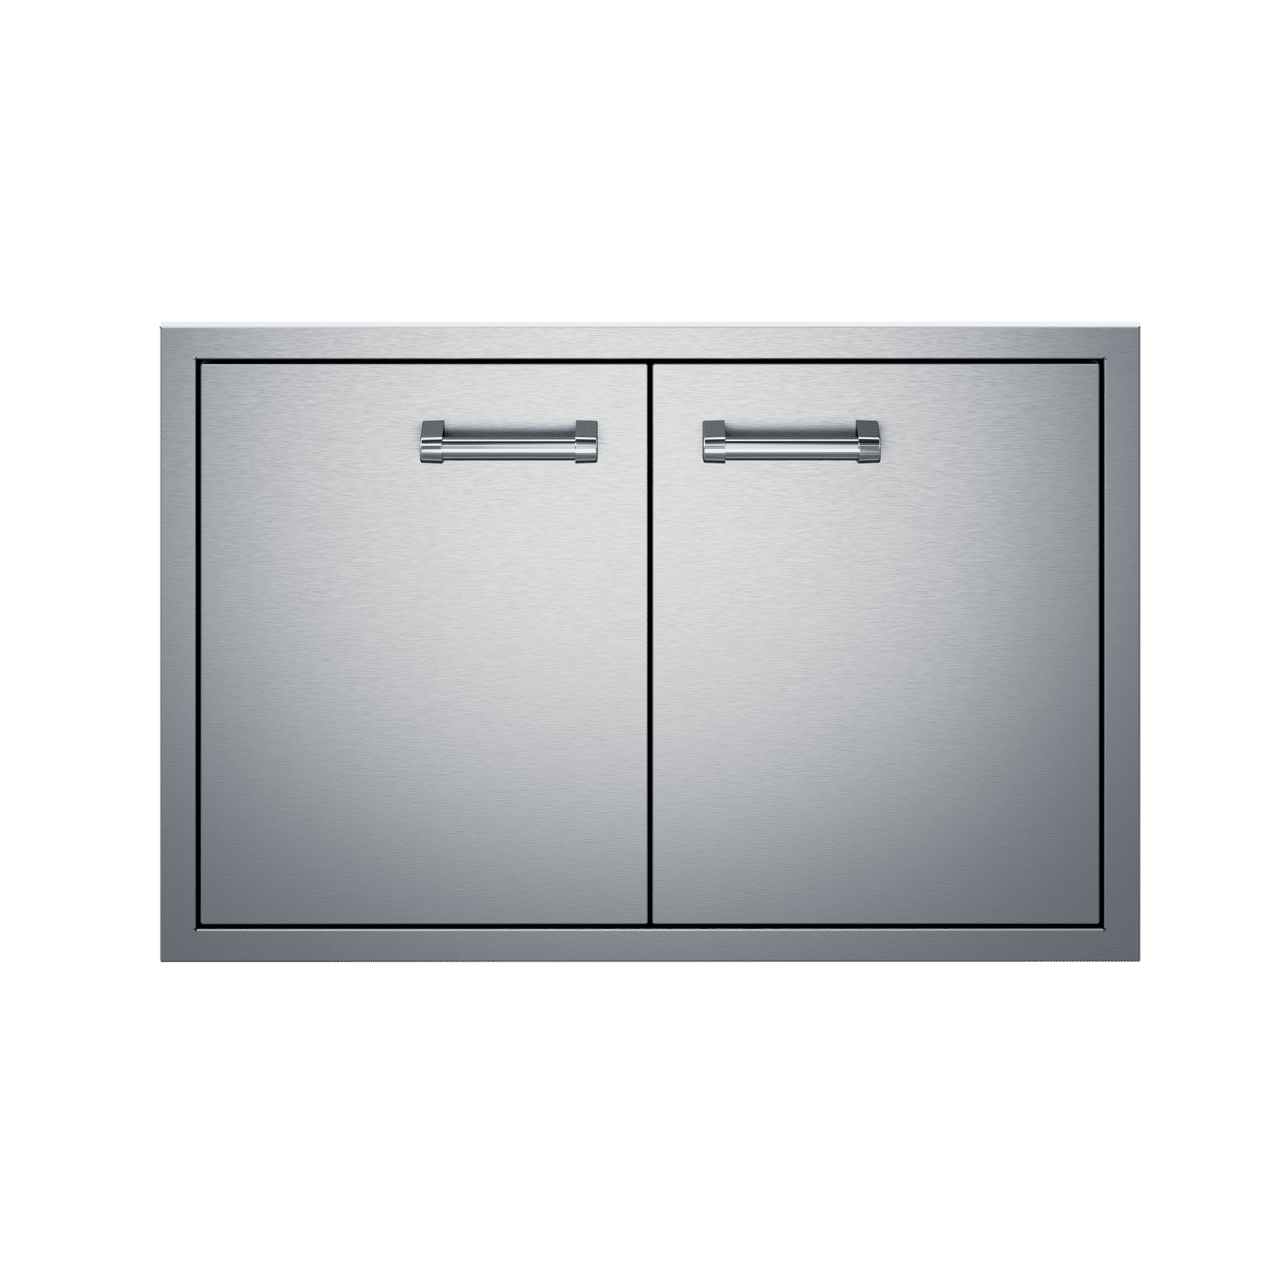 Delta Heat Stainless Steel Double Access Doors Cabinets & Storage 32